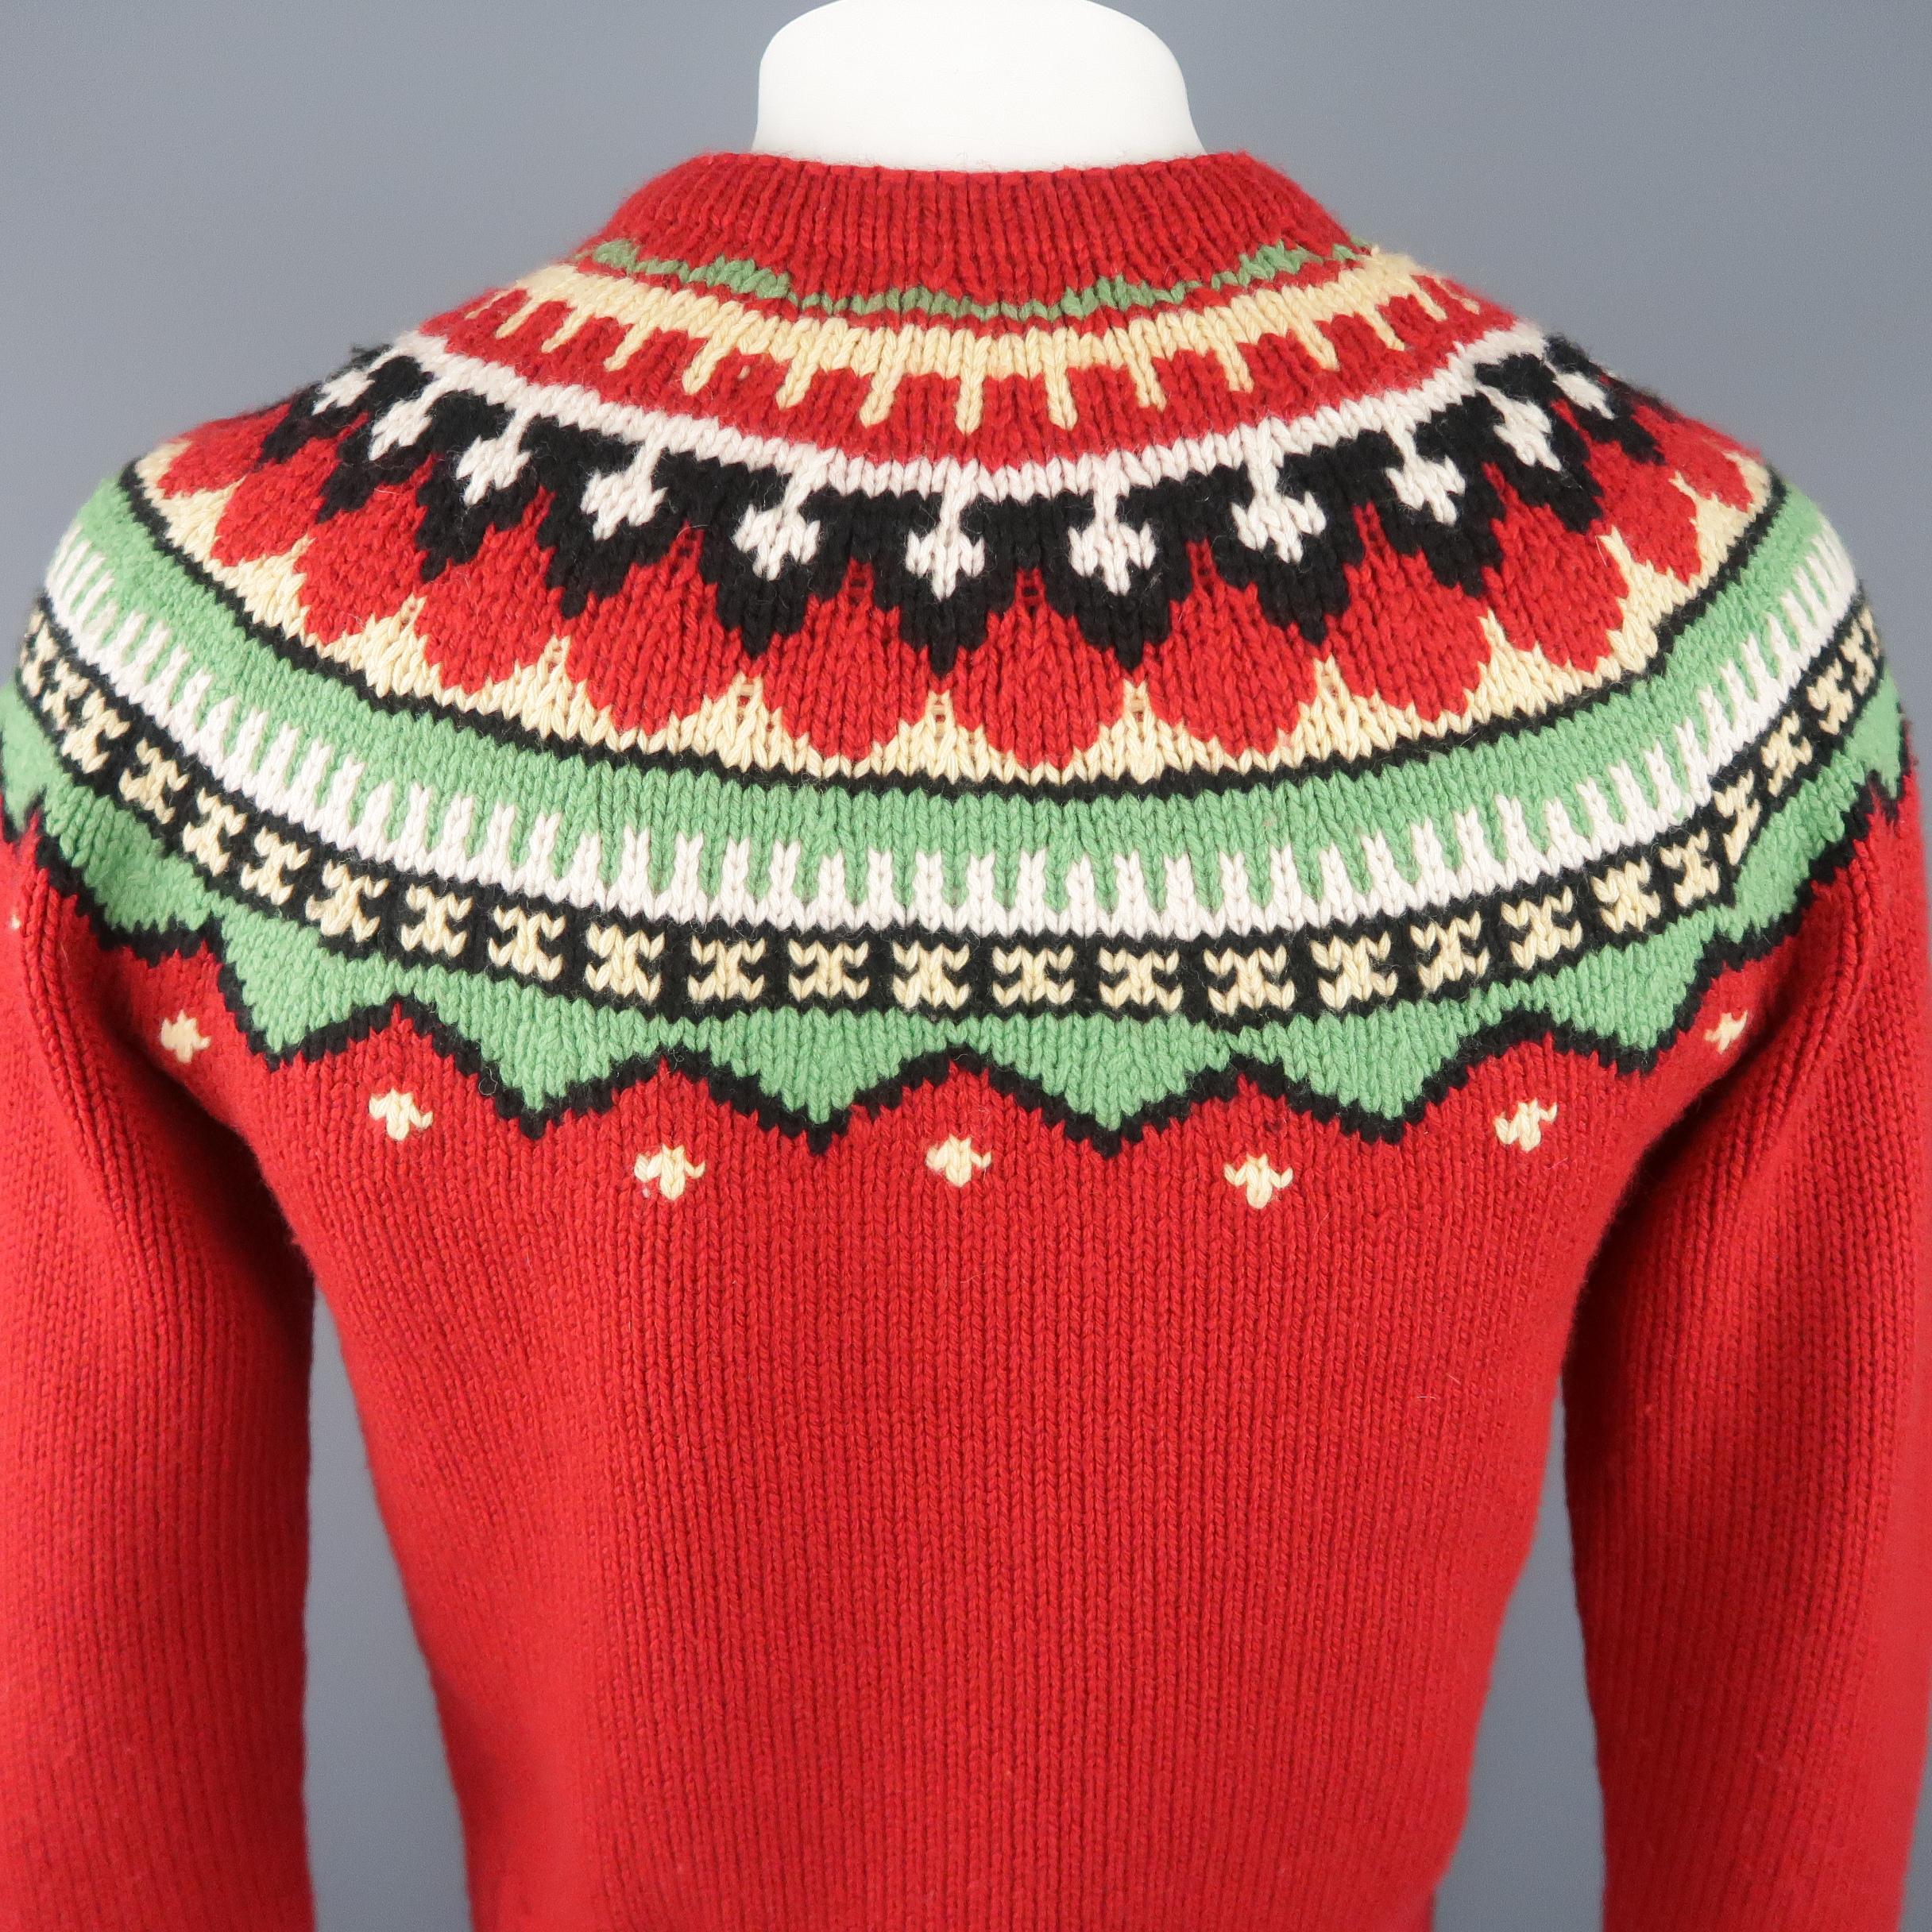 red knitted sweater